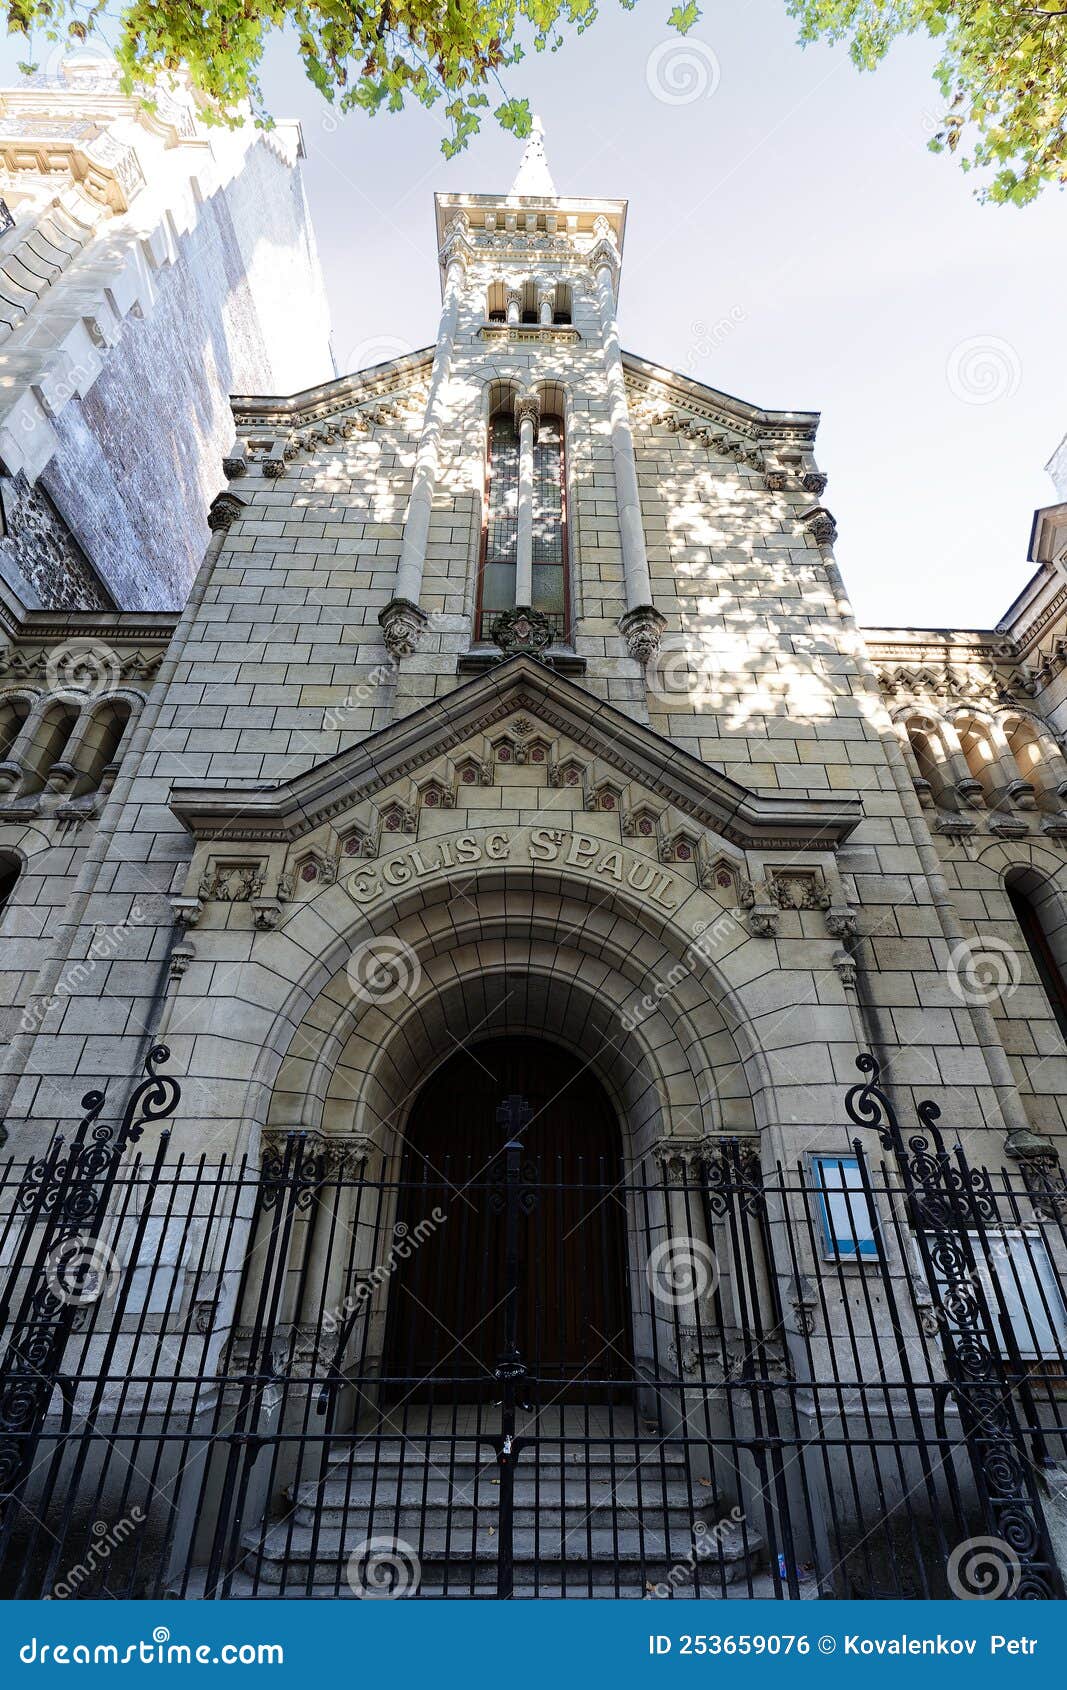 the lutheran church of saint-paul de montmartre is a religious building built in 1897 and located at boulevard barbes